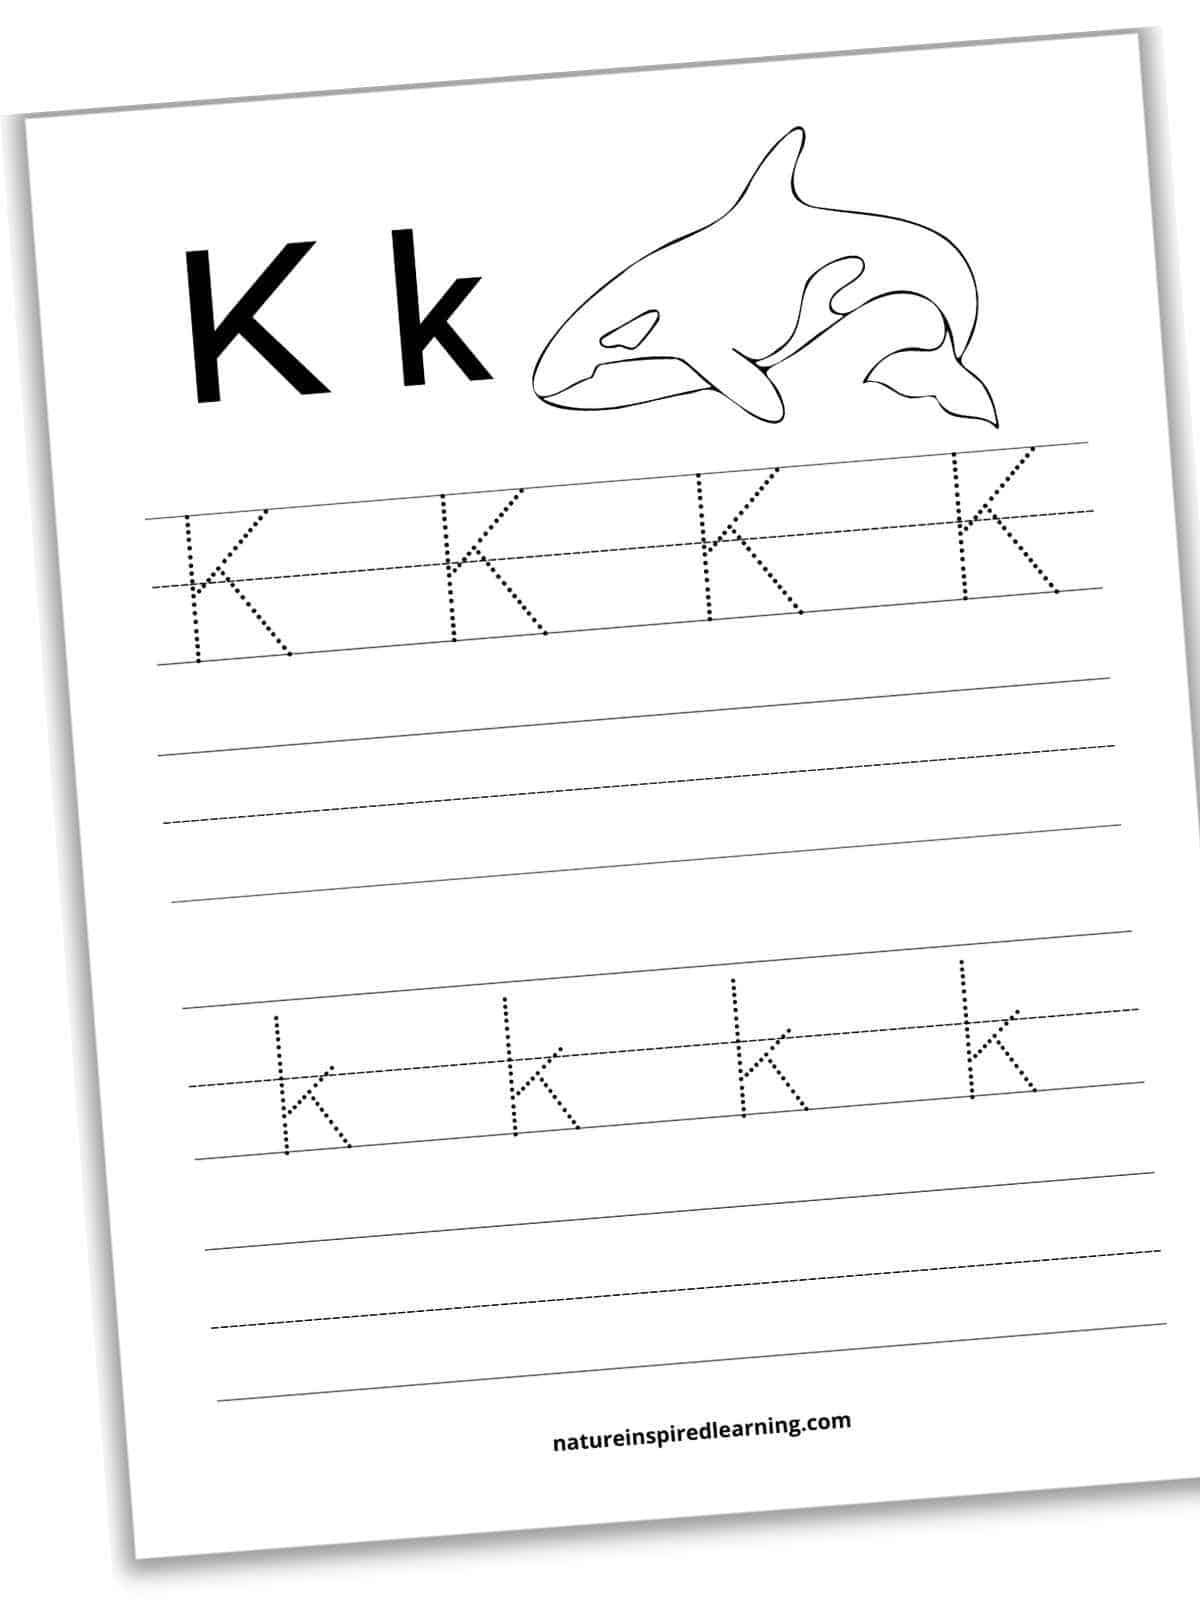 Worksheet with bold K k next to a black and white killer whale with four sets of lines. Dotted K's on the first set then a blank set of lines. Dotted k's on the third set of lines with a black set below.